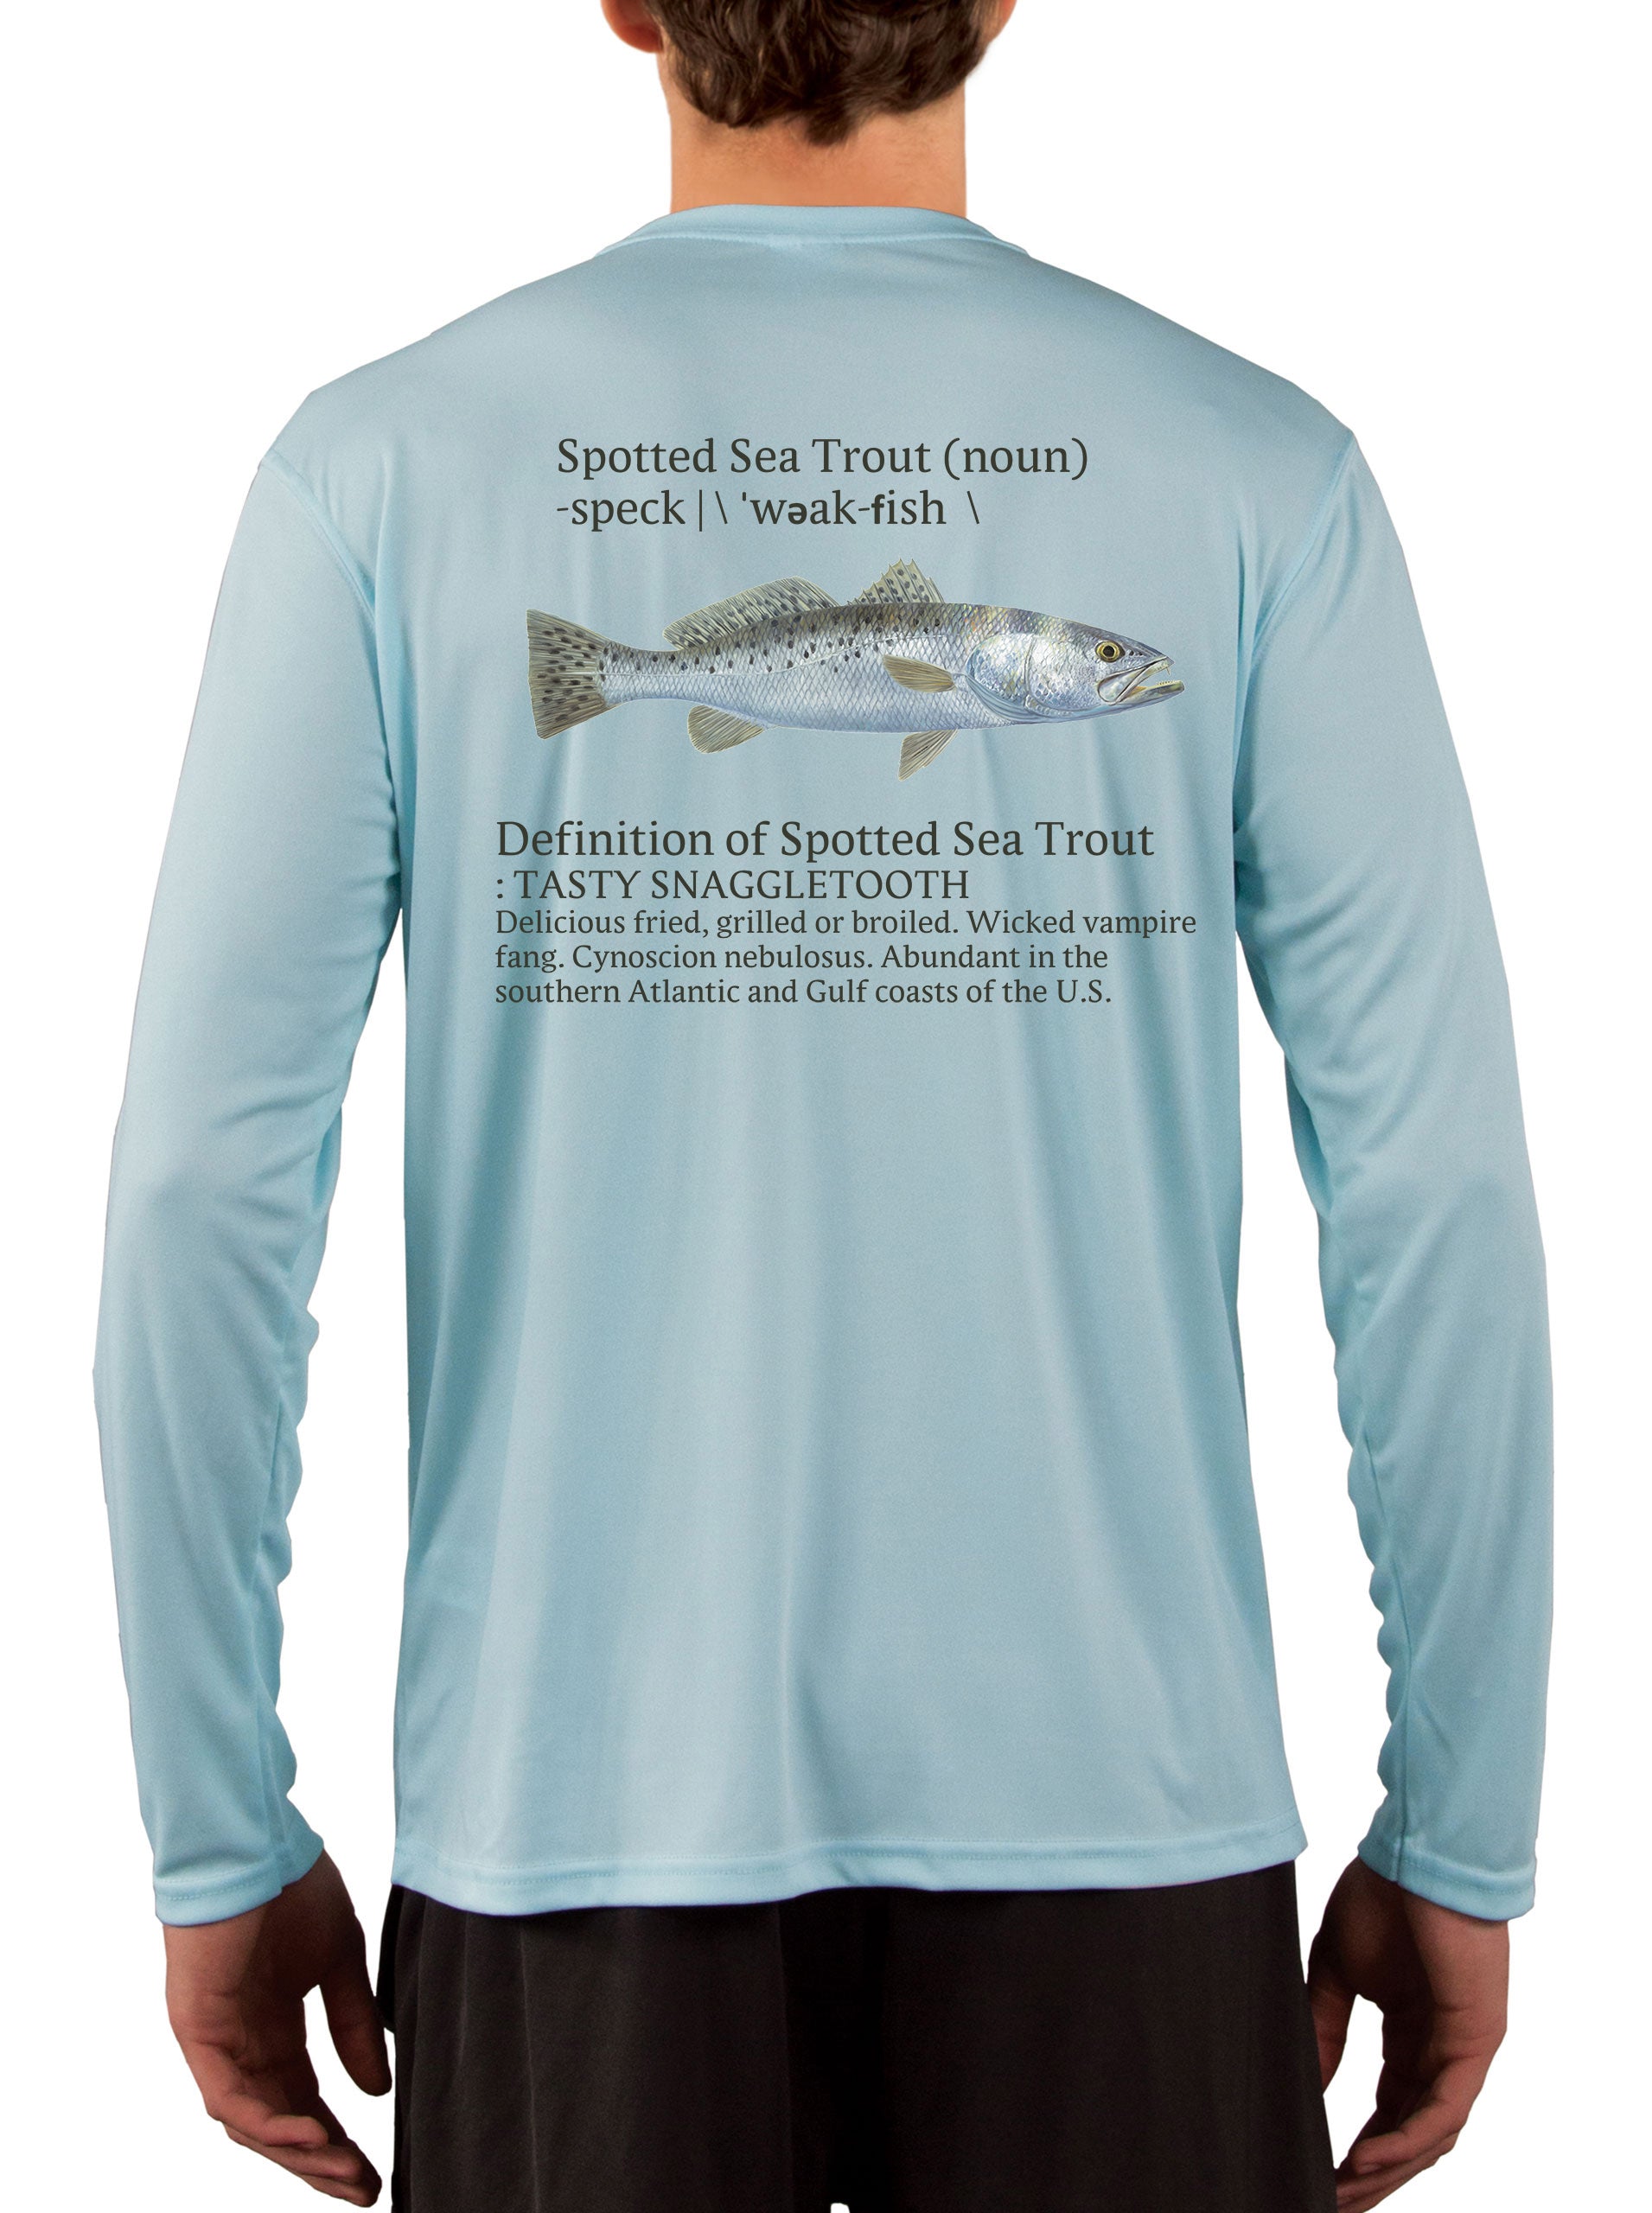 Speckled Trout Fishing Shirts for Men Skiff Inshore - UV Protected +50 Sun Protection with Moisture Wicking Technology - Skiff Life